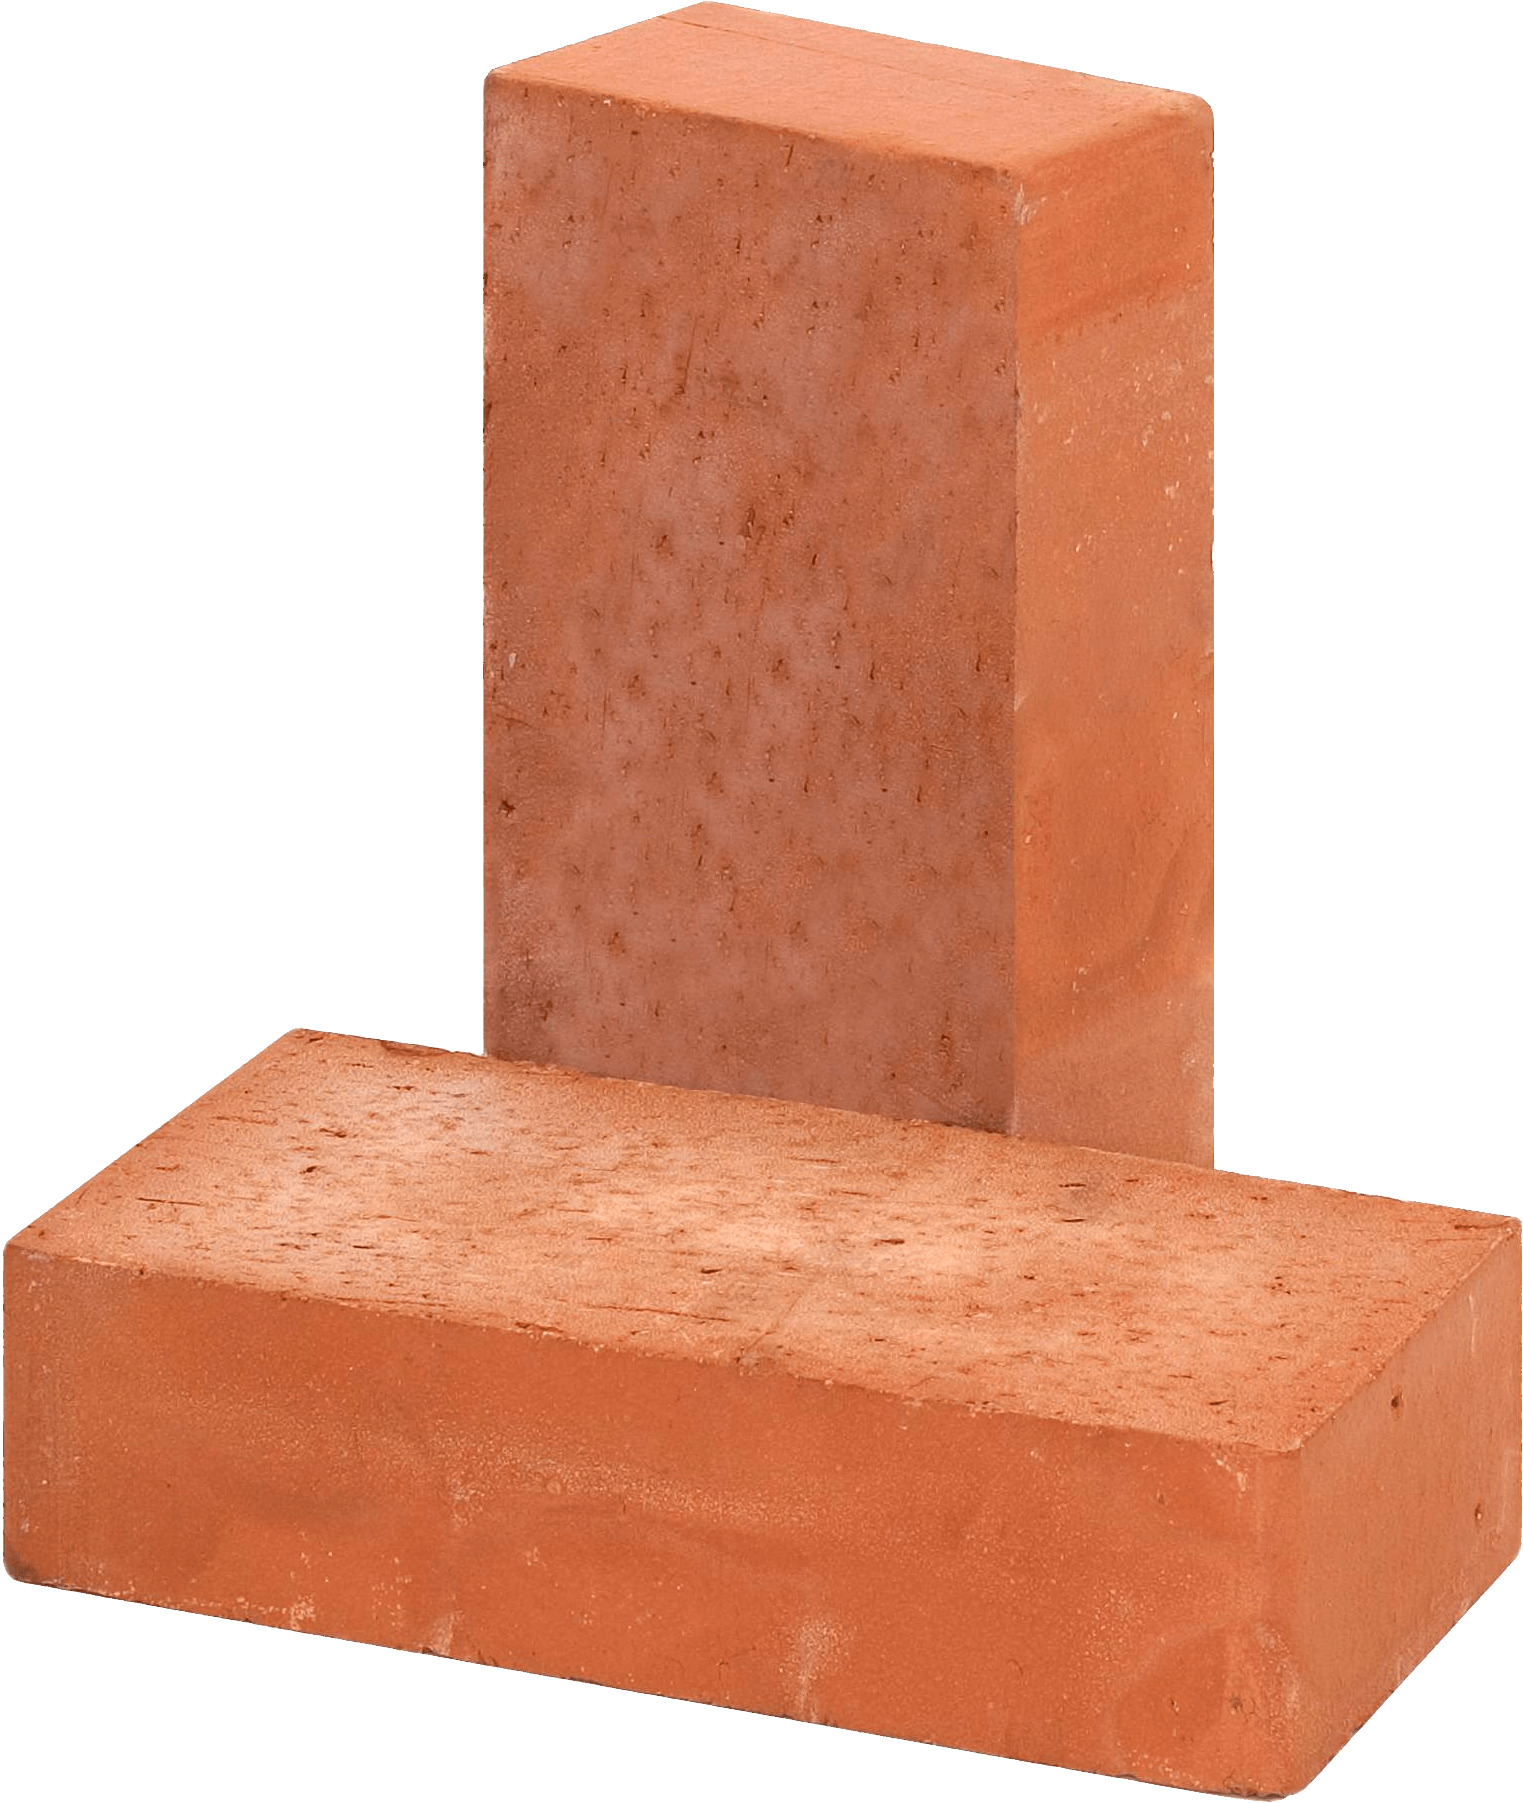 Two Bricks png icons